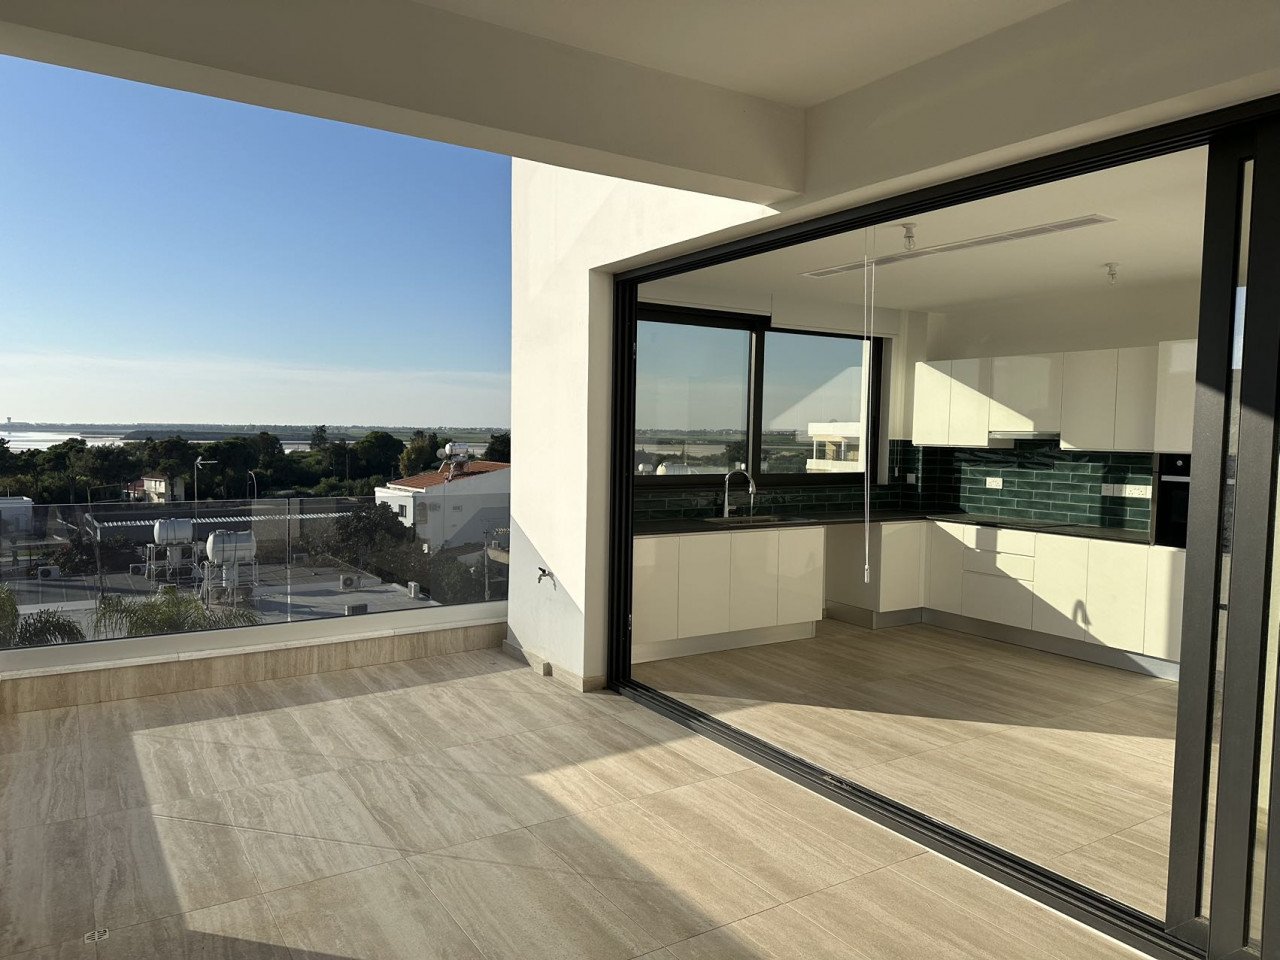 Property for Rent: Apartment (Penthouse) in Faneromeni, Larnaca for Rent | Key Realtor Cyprus